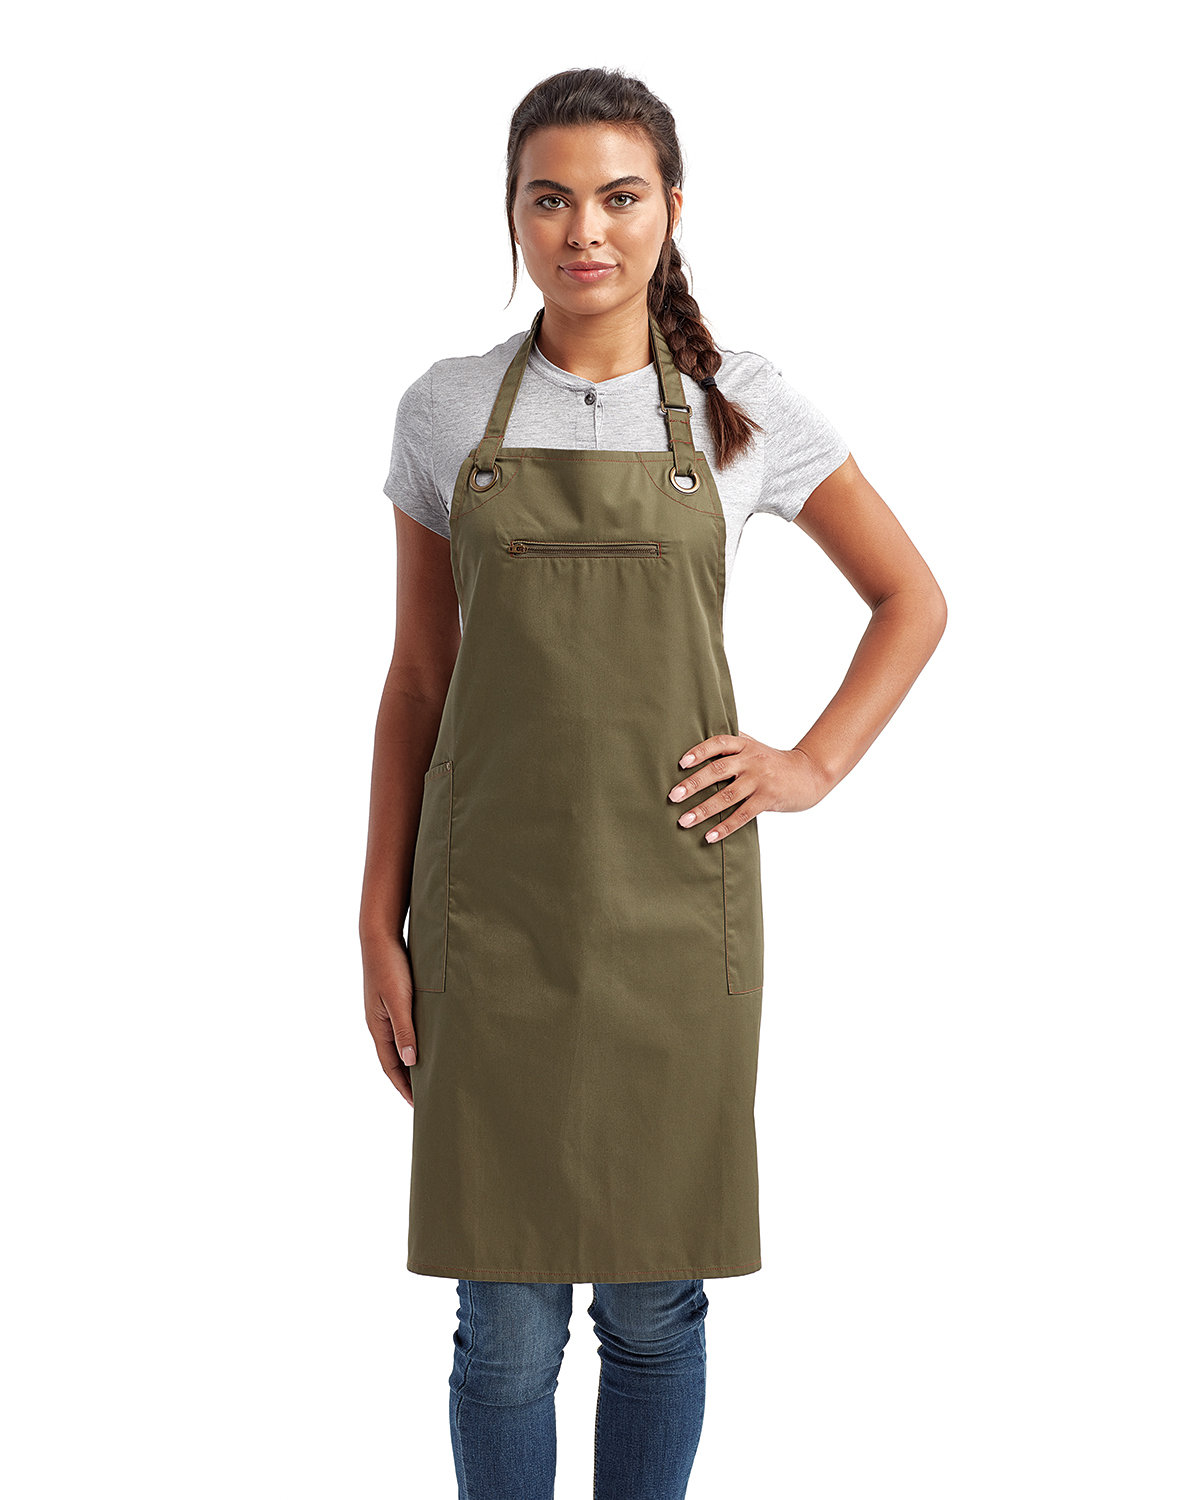 Unisex ‘barley’ Contrast Stitch Recycled Bib Apron-Artisan Collection by Reprime